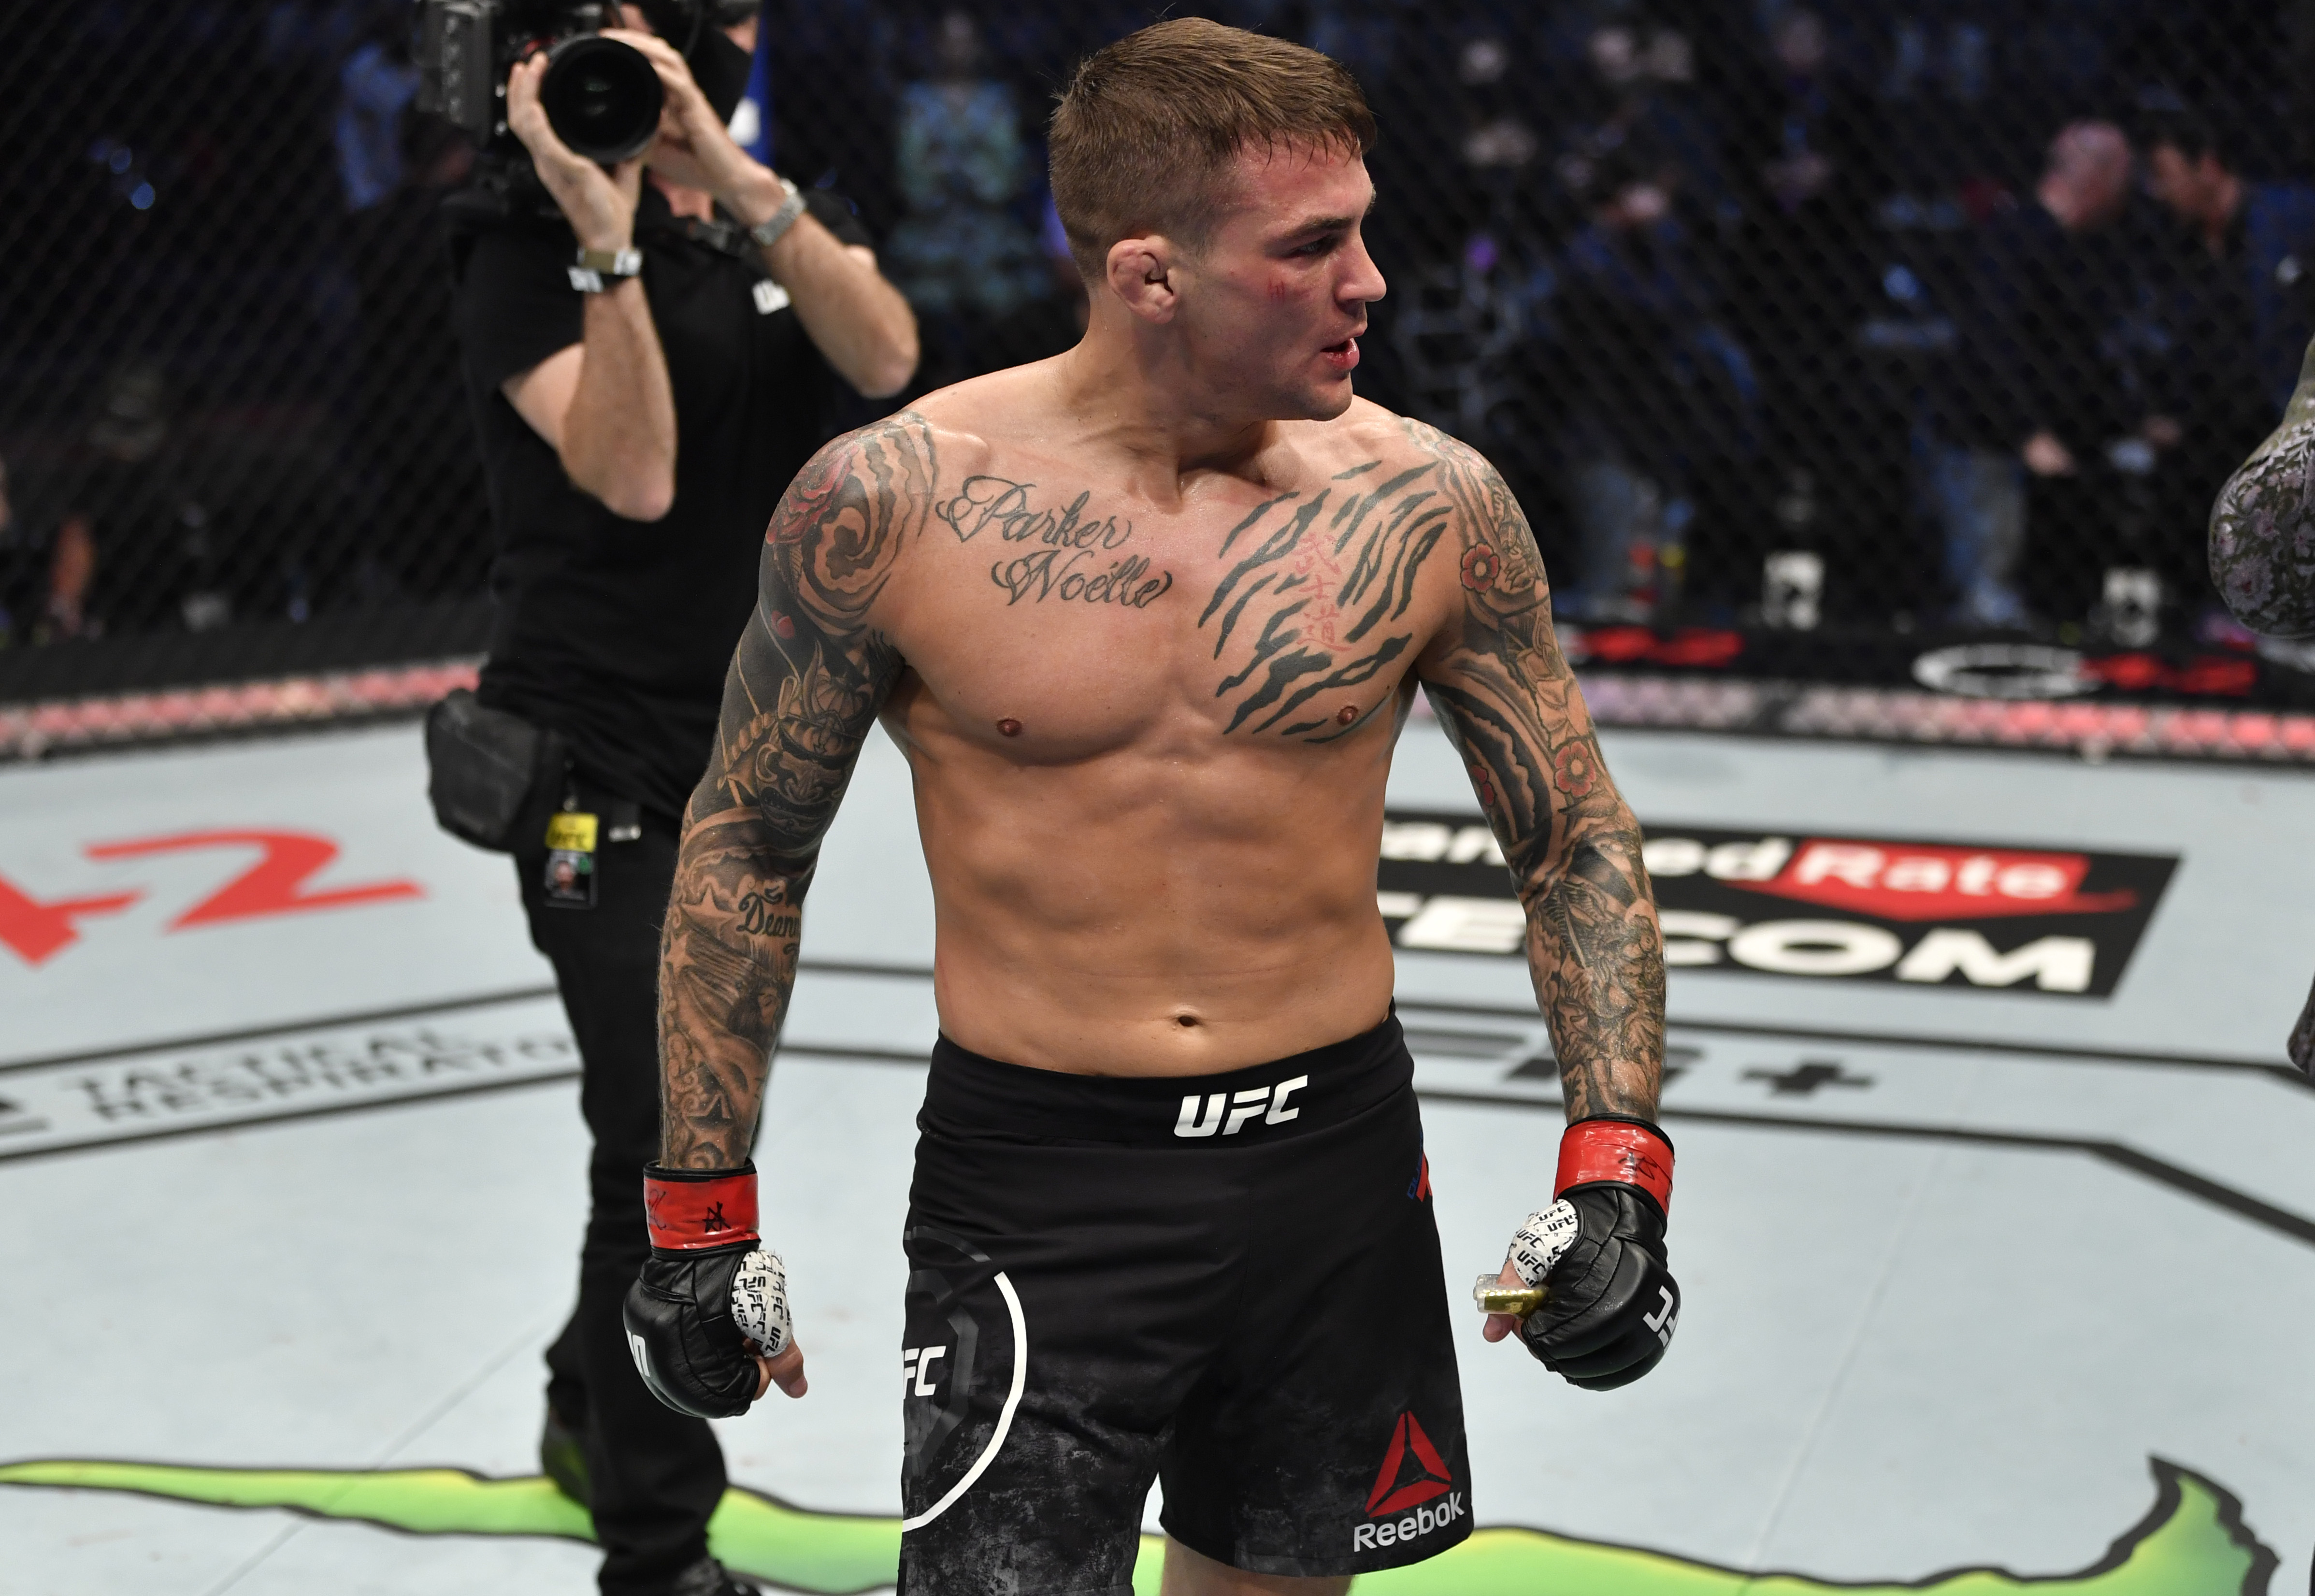 Dustin Poirier Hit Several UFC Milestones After Beating Conor McGregor for the 1st Time